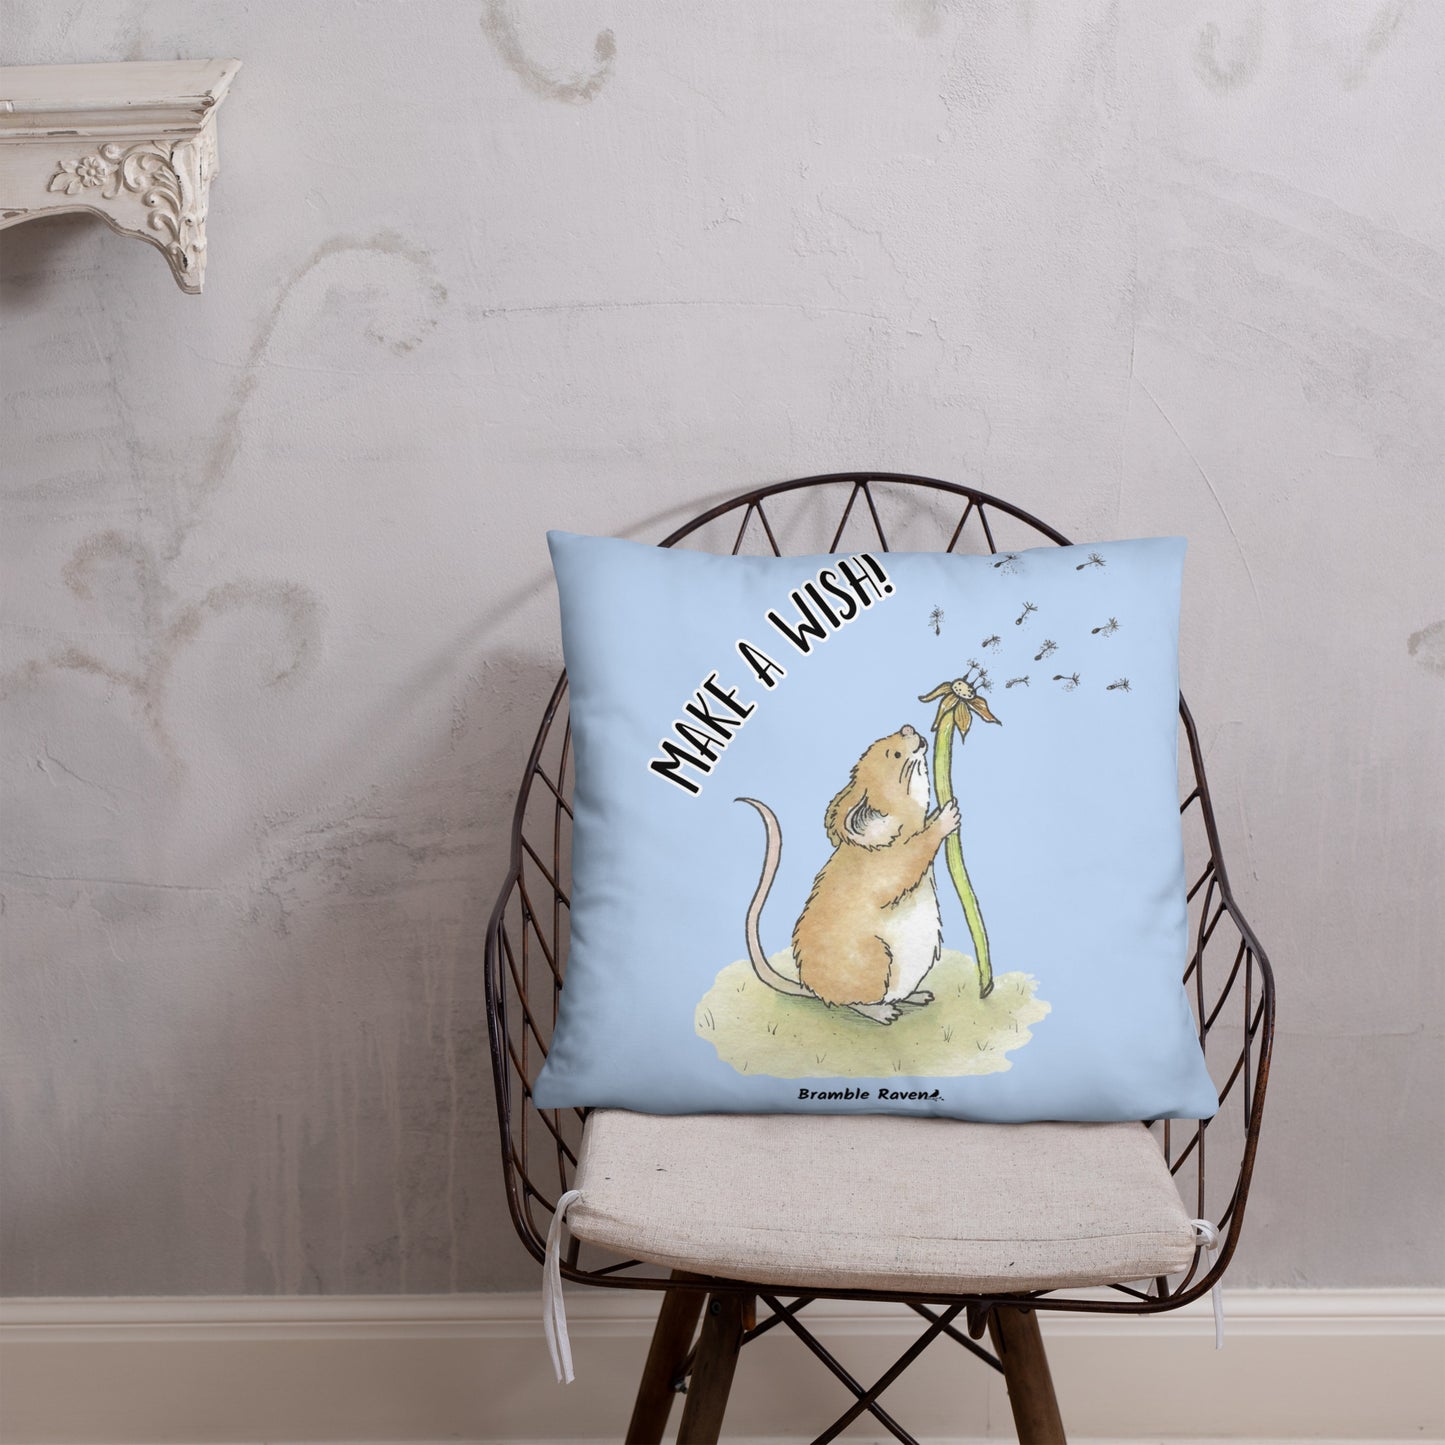 Original Dandelion Wish design of cute watercolor mouse blowing dandelion seeds on a light blue background. Double-sided image on 22 by 22 inch pillow. Back image has make a wish phrase. Shown on wicker chair.